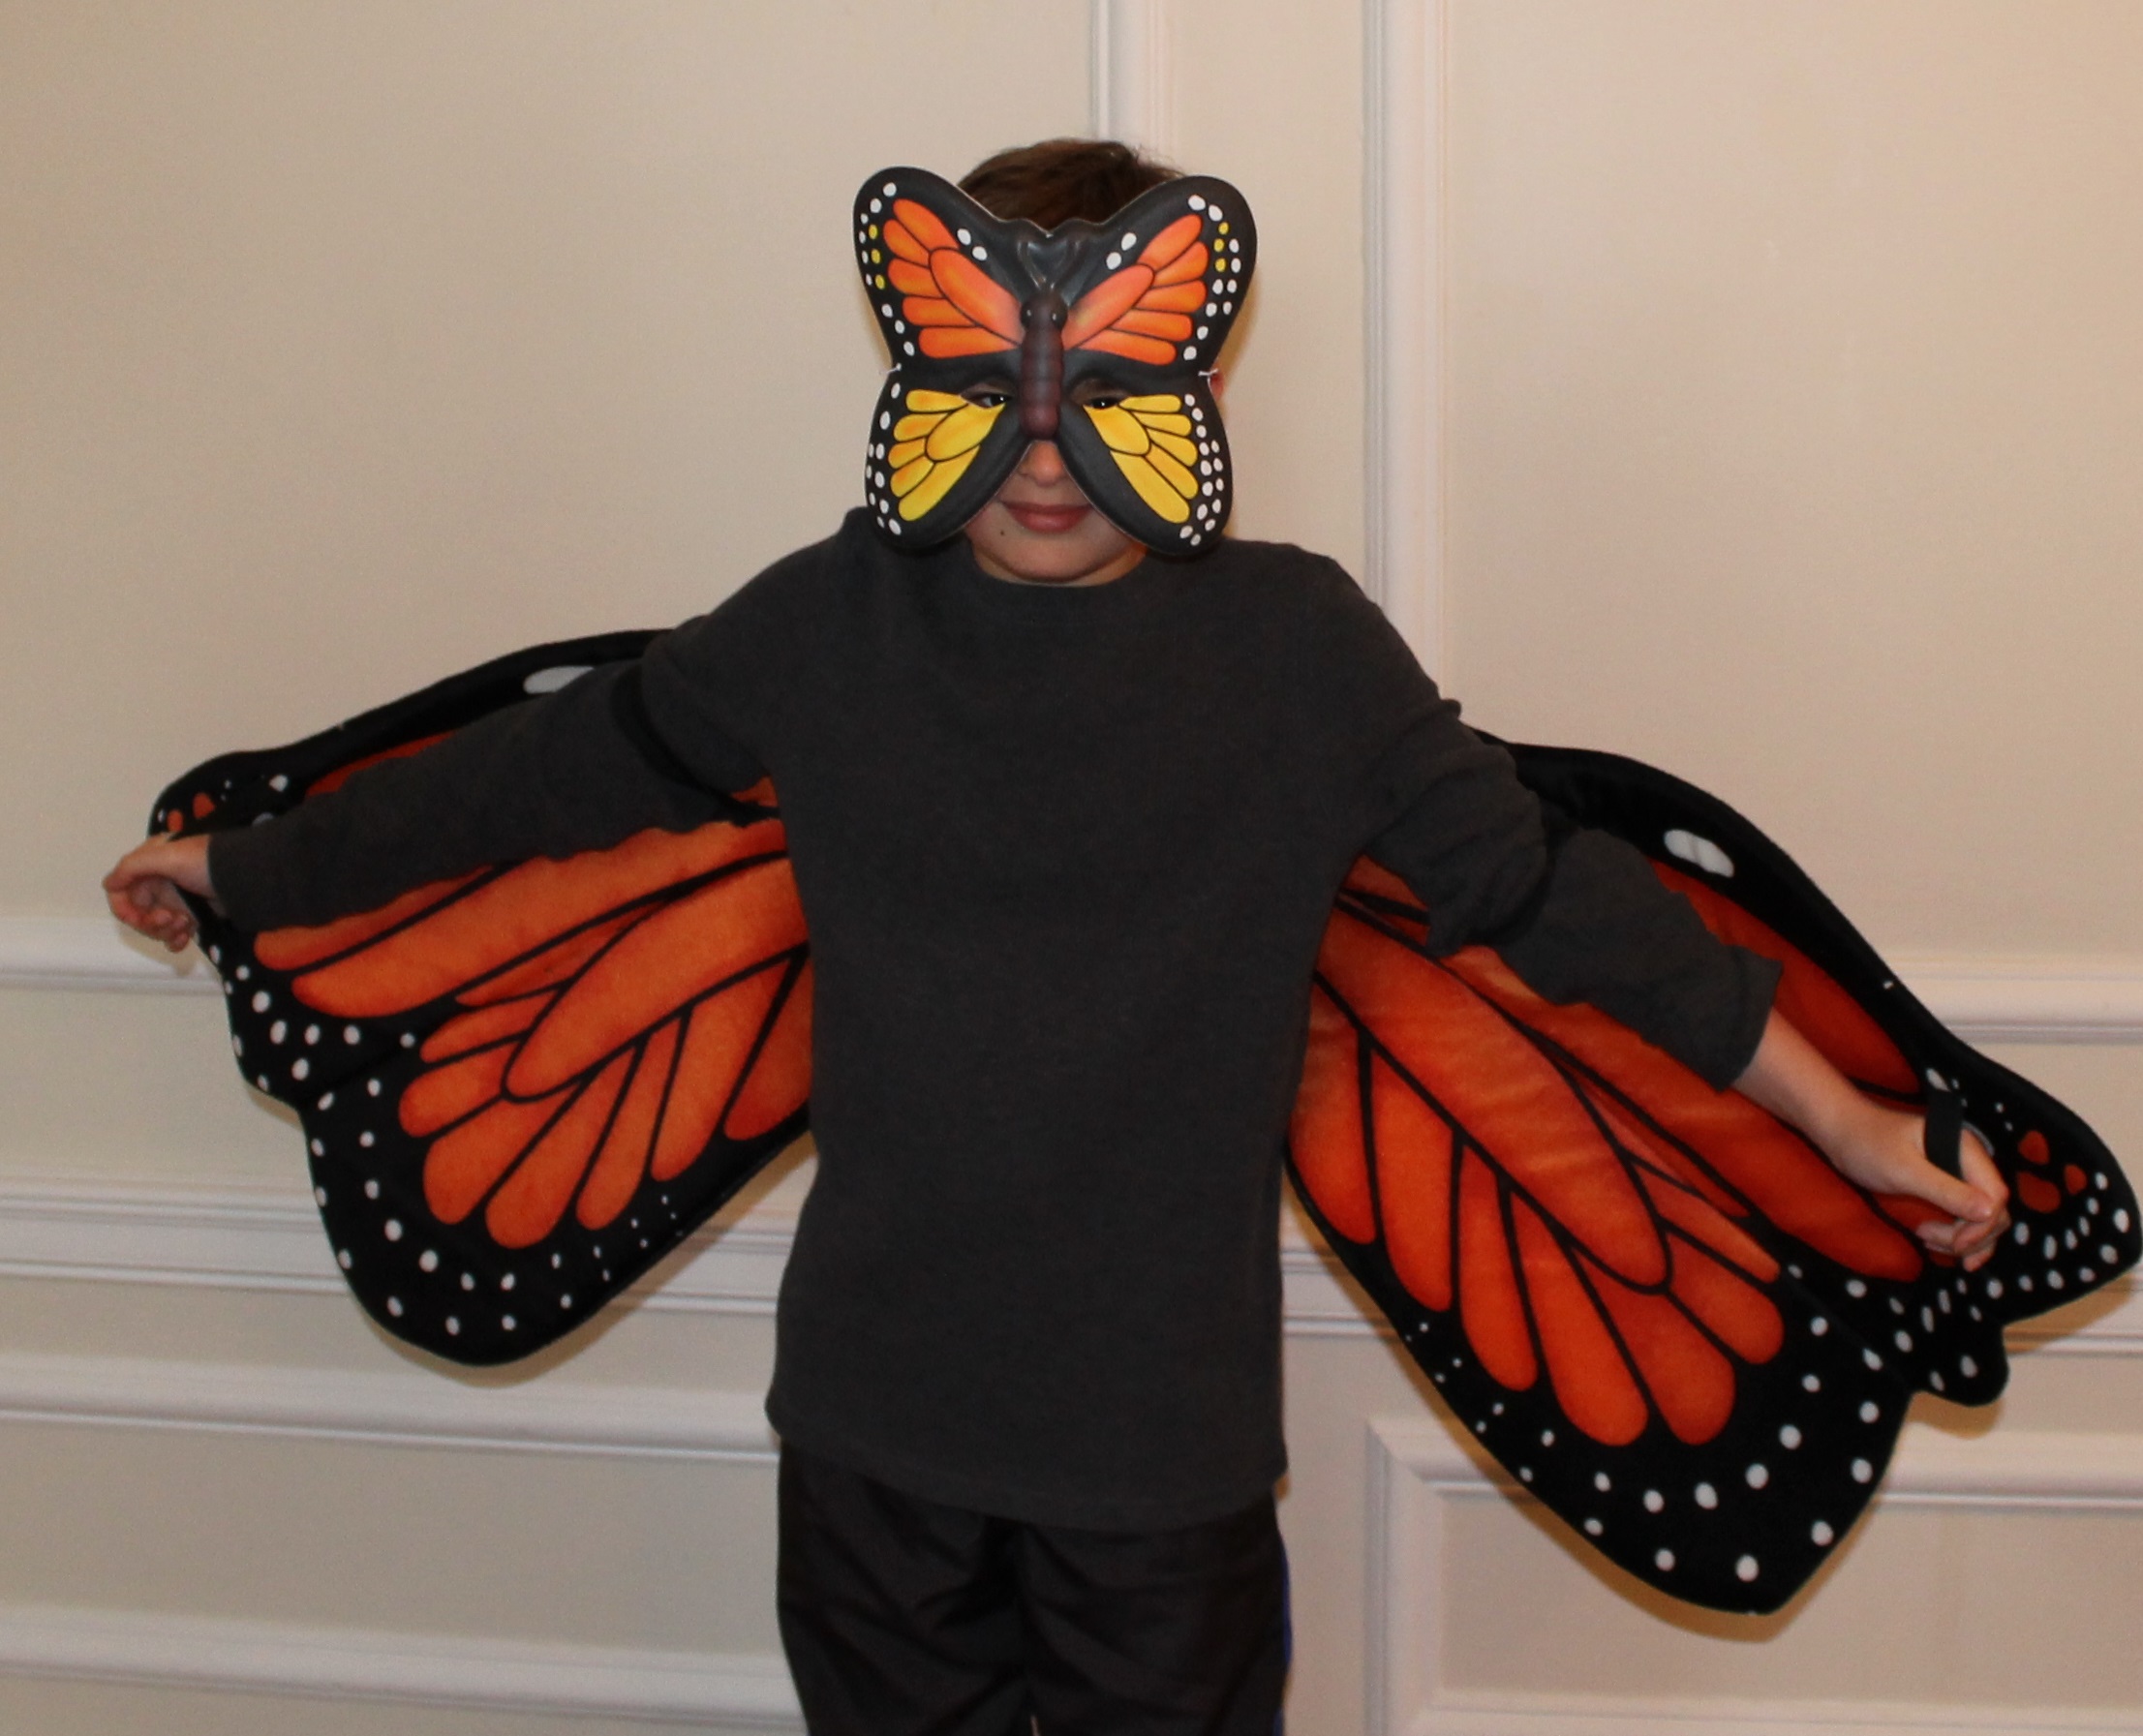 Children participated in arts and crafts centered around the Monarch butterfly at HOW’s Sixth Annual Memorial Butterfly Release.